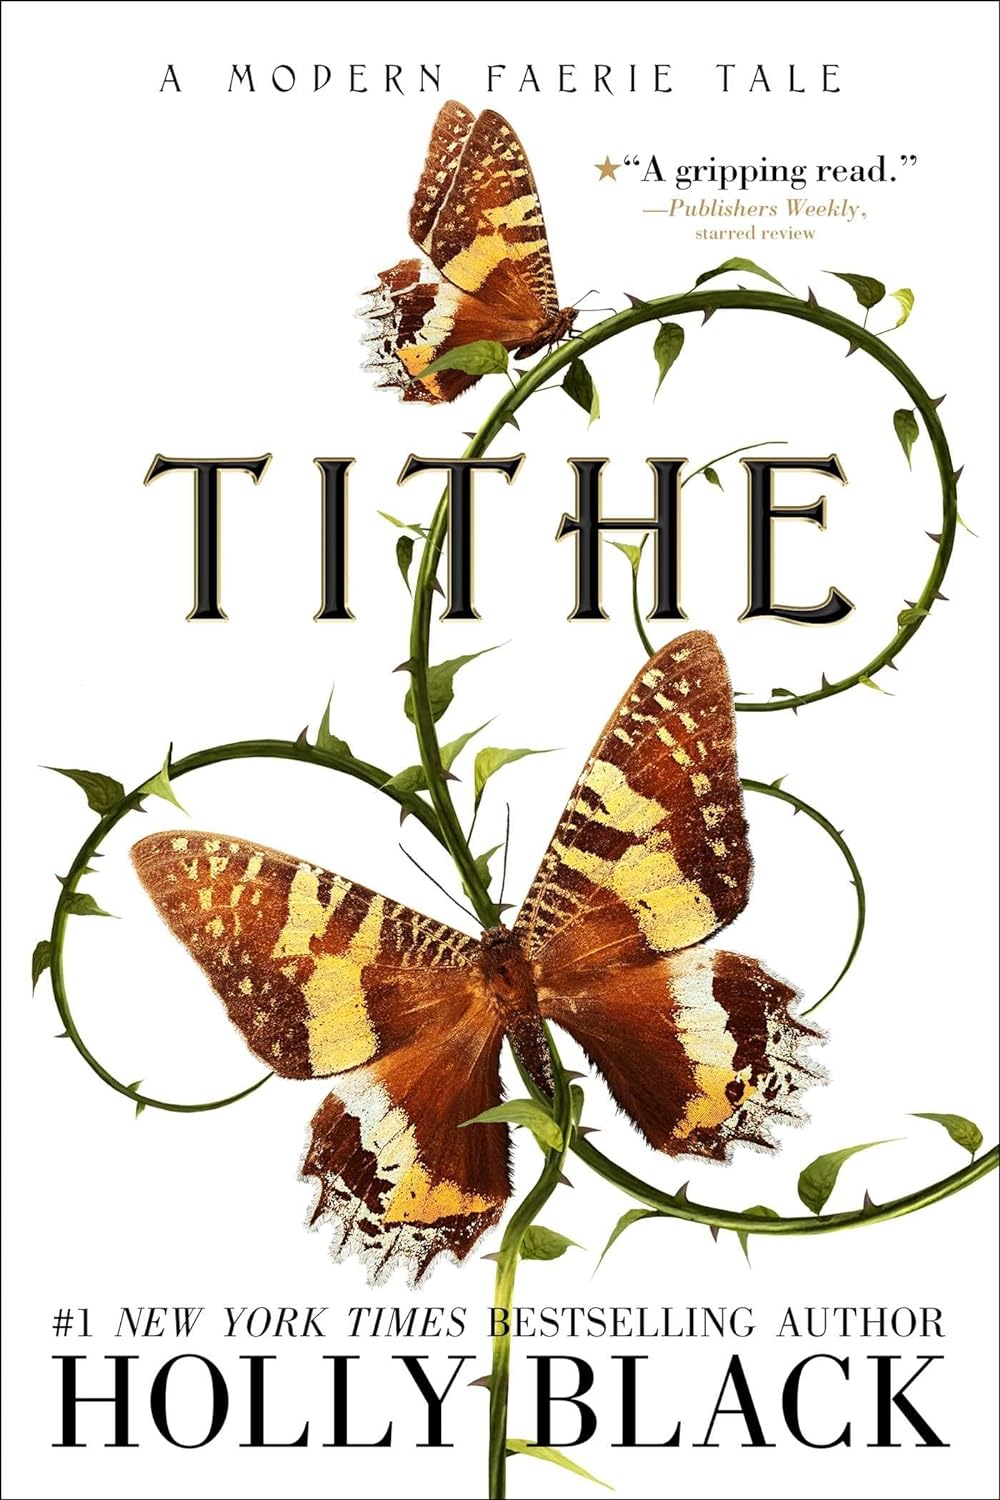 Tithe: A Modern Faerie Tale (Modern Faerie Tales) - by Holly Black